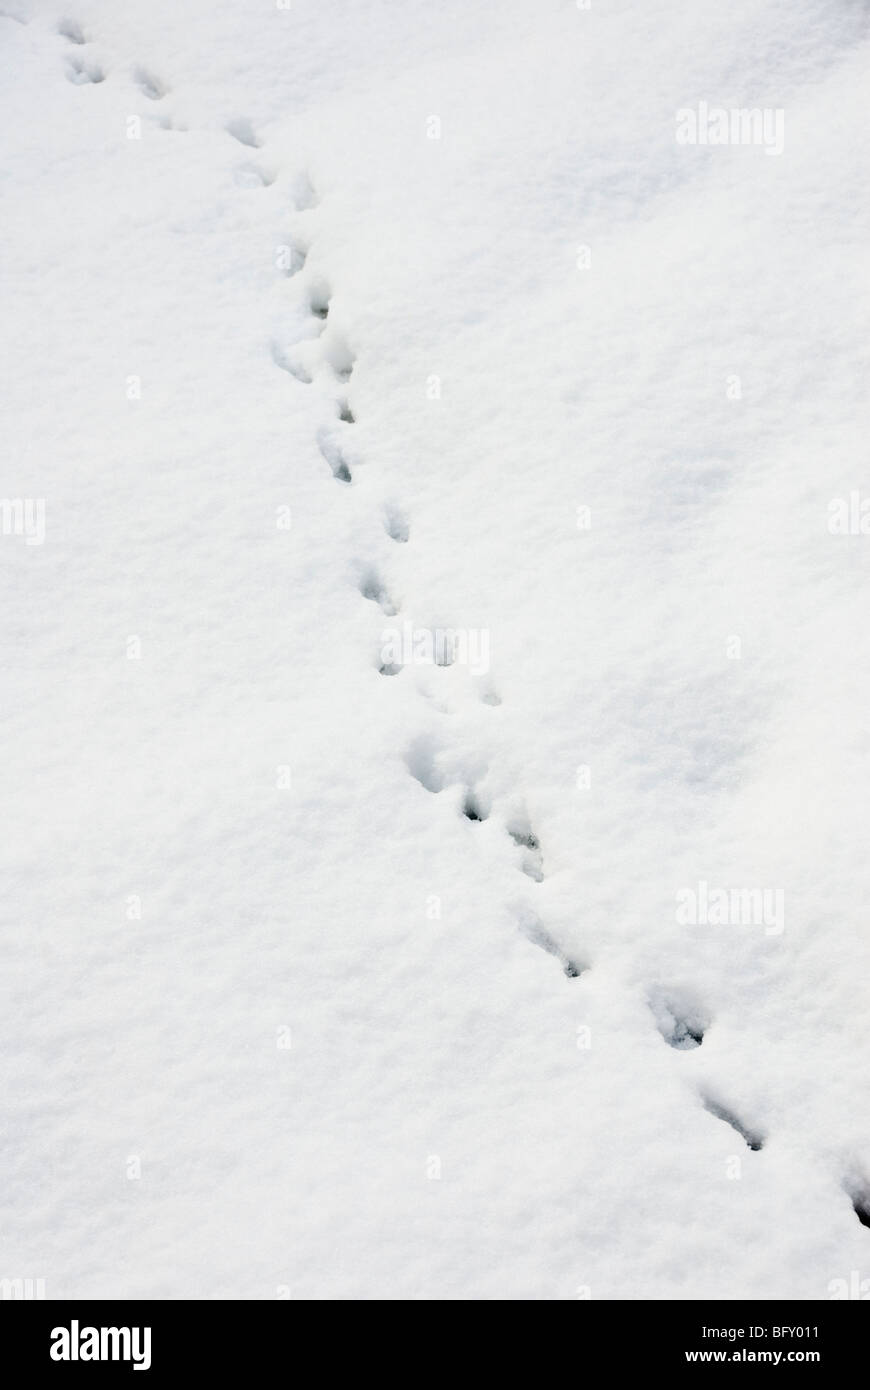 Trail of Small Animal Footprints in Snow Stock Photo